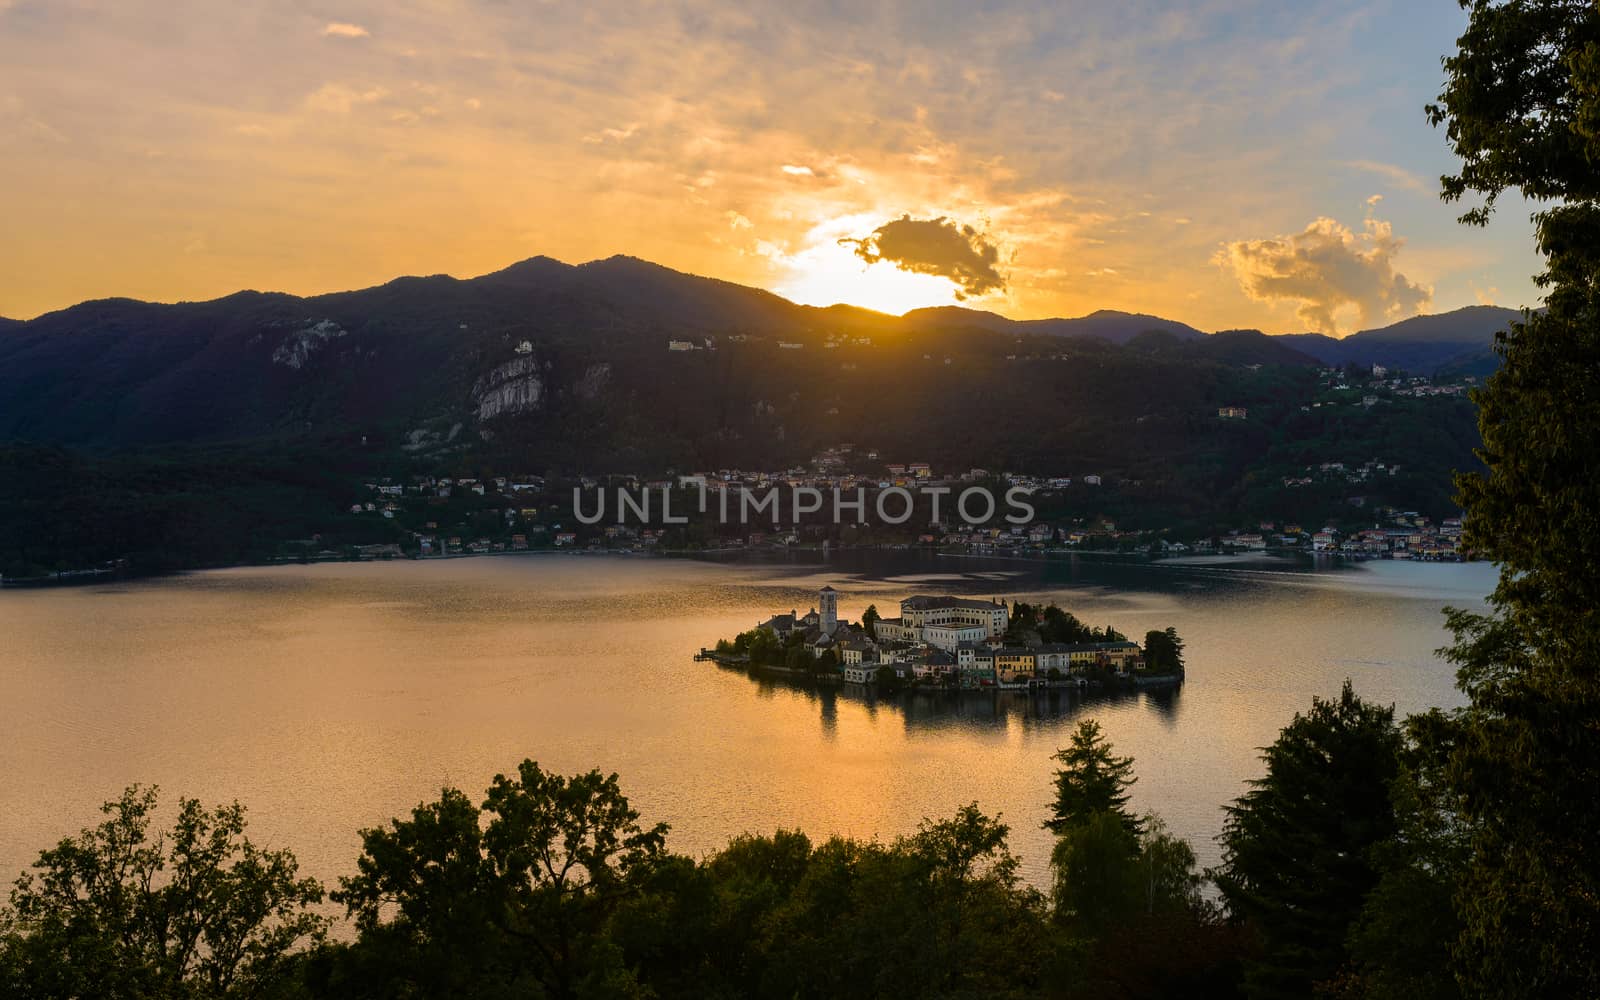 Lake Orta is known as the most romantic lake in Italy. 
located in Piedmont in northern Italy. 
In the middle of the lake there is the beautiful island of San Giulio.